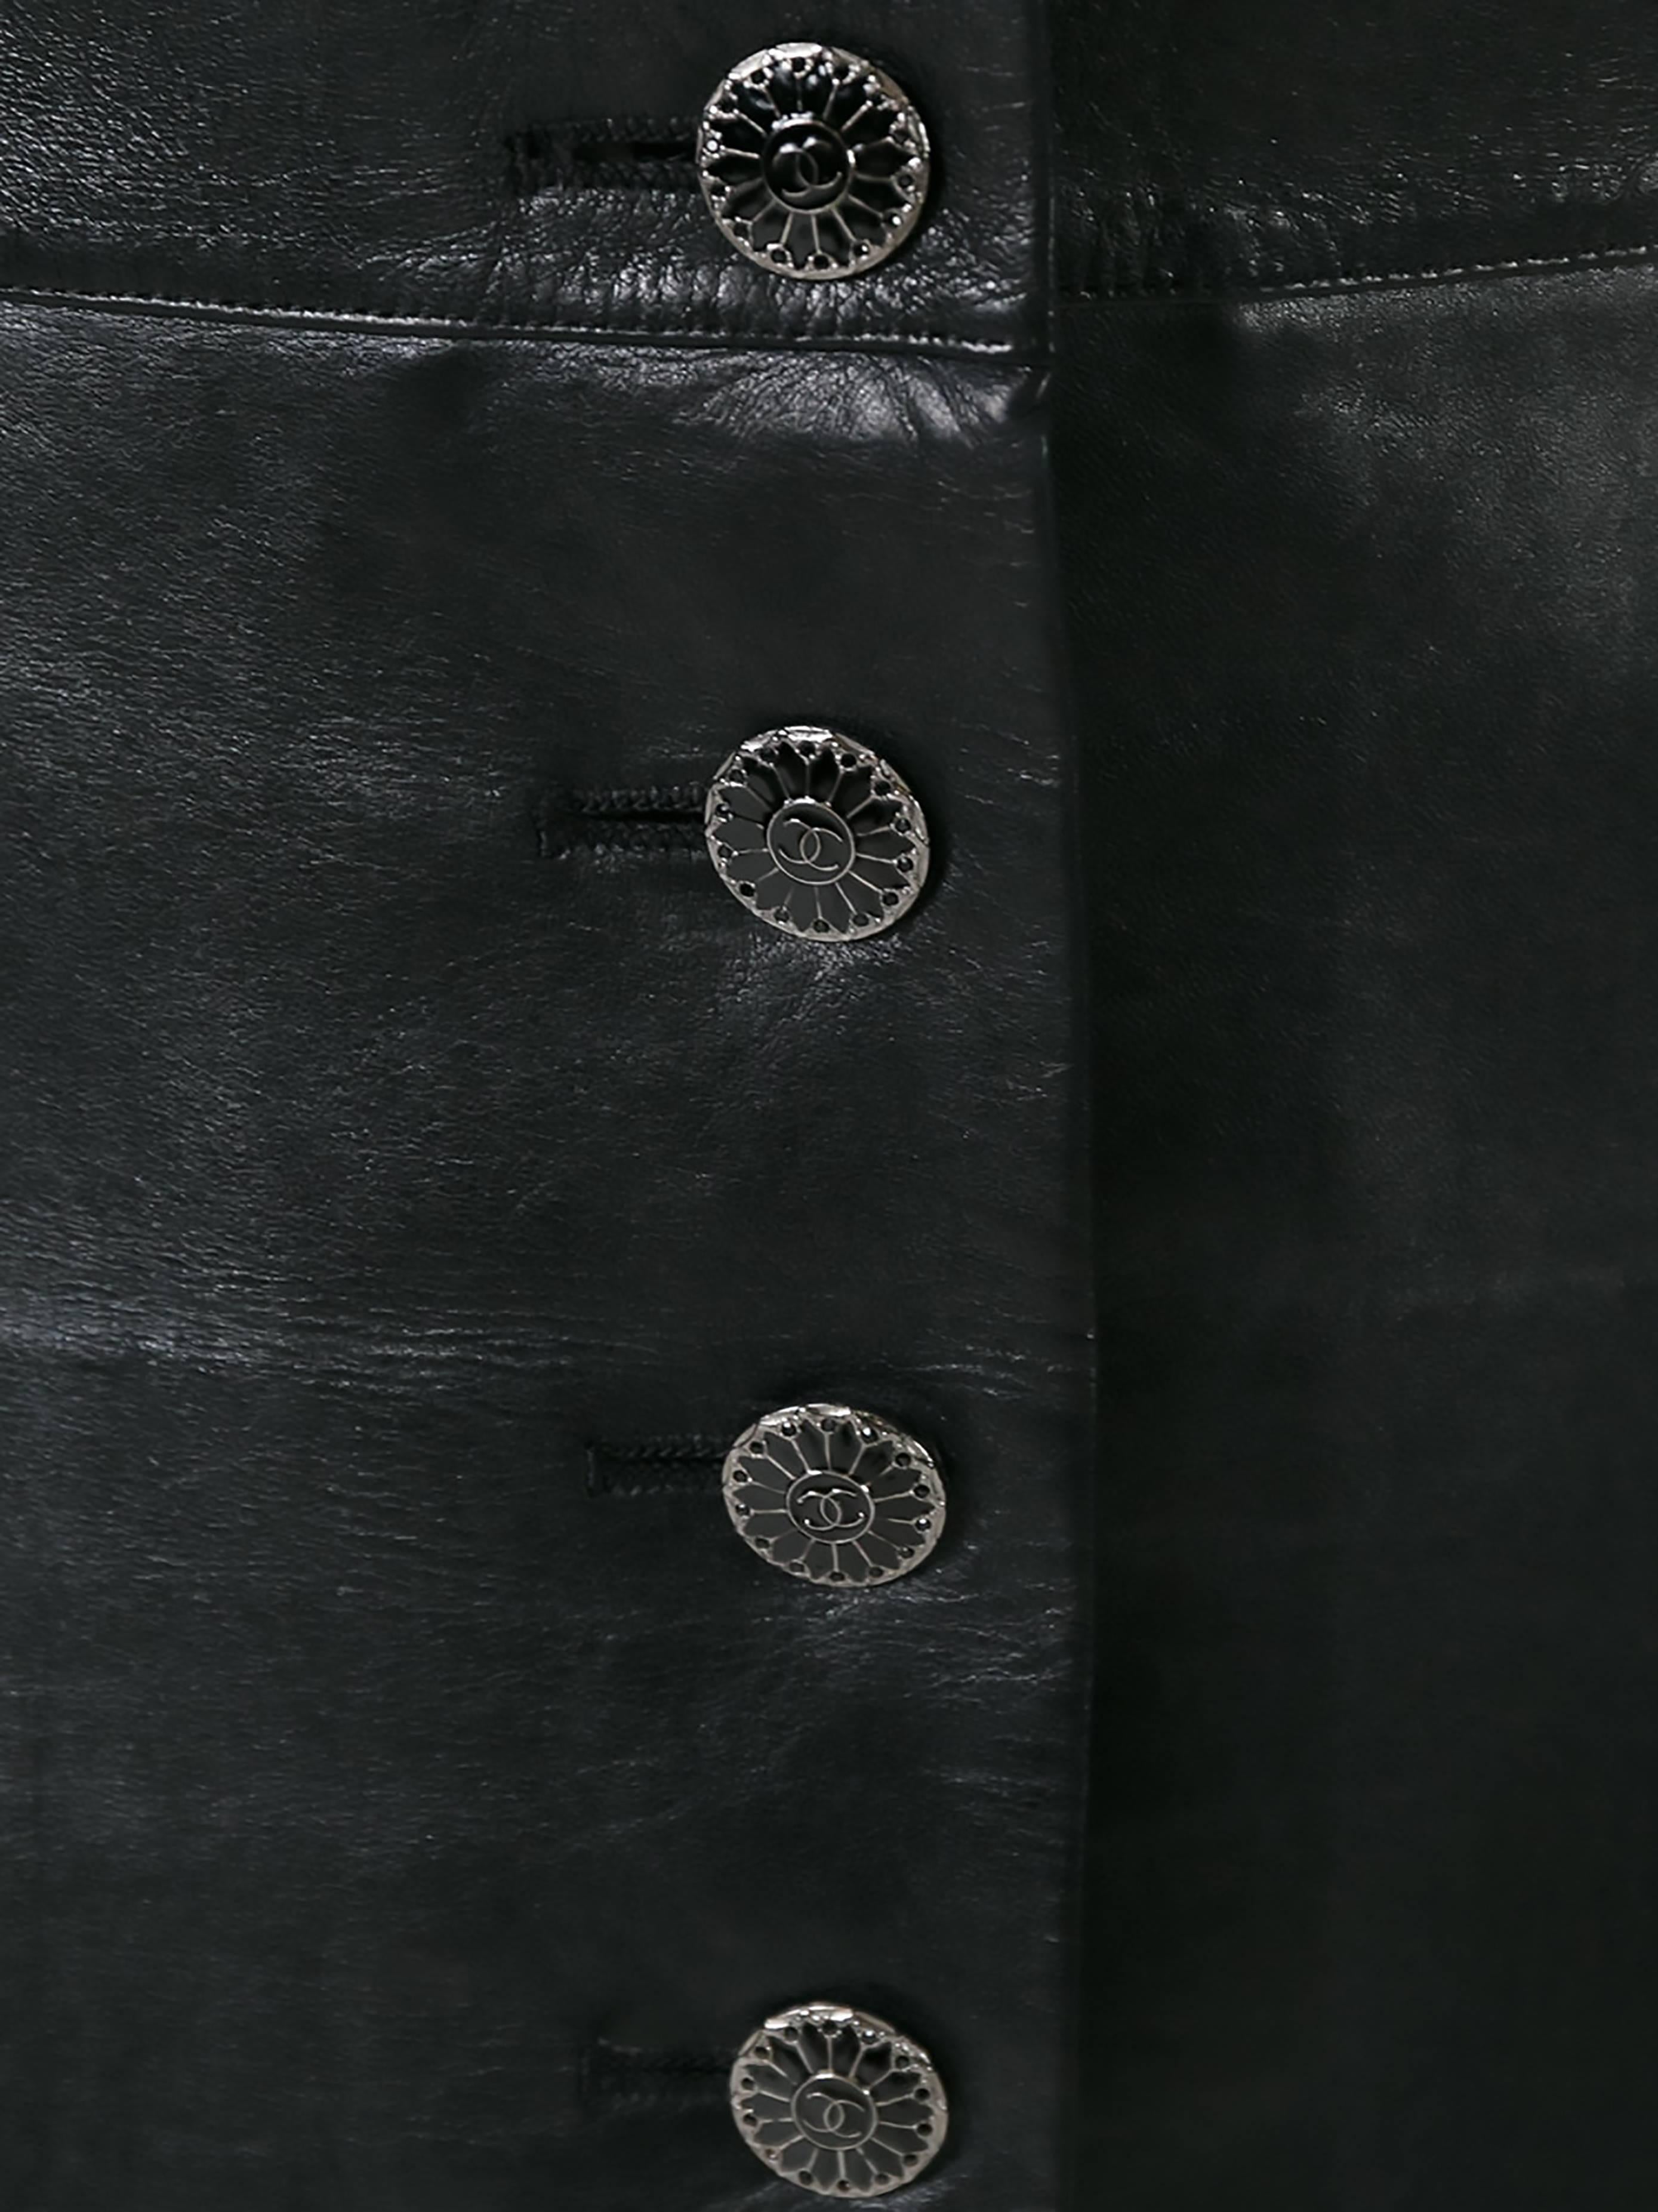 Perfect for adding tough-luxe to a look, this Chanel black leather mini skirt features a button-down front, finished with metallic monogram medallions. It has two side pockets and a black silk lining.

Colour: Black

Composition: Outer: 100%